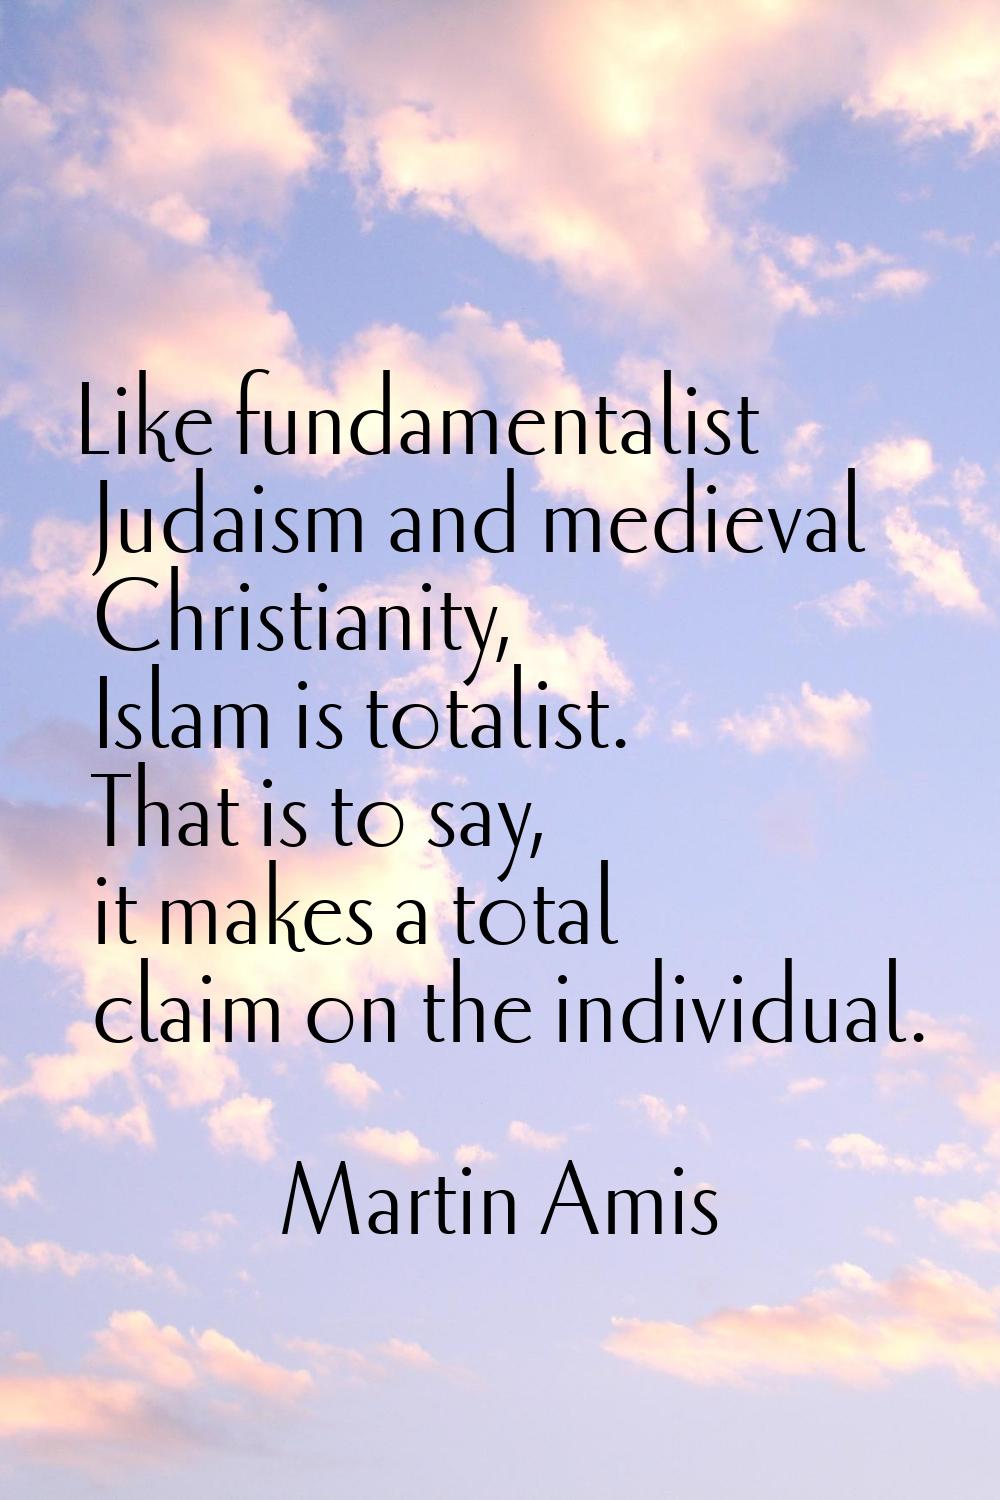 Like fundamentalist Judaism and medieval Christianity, Islam is totalist. That is to say, it makes 